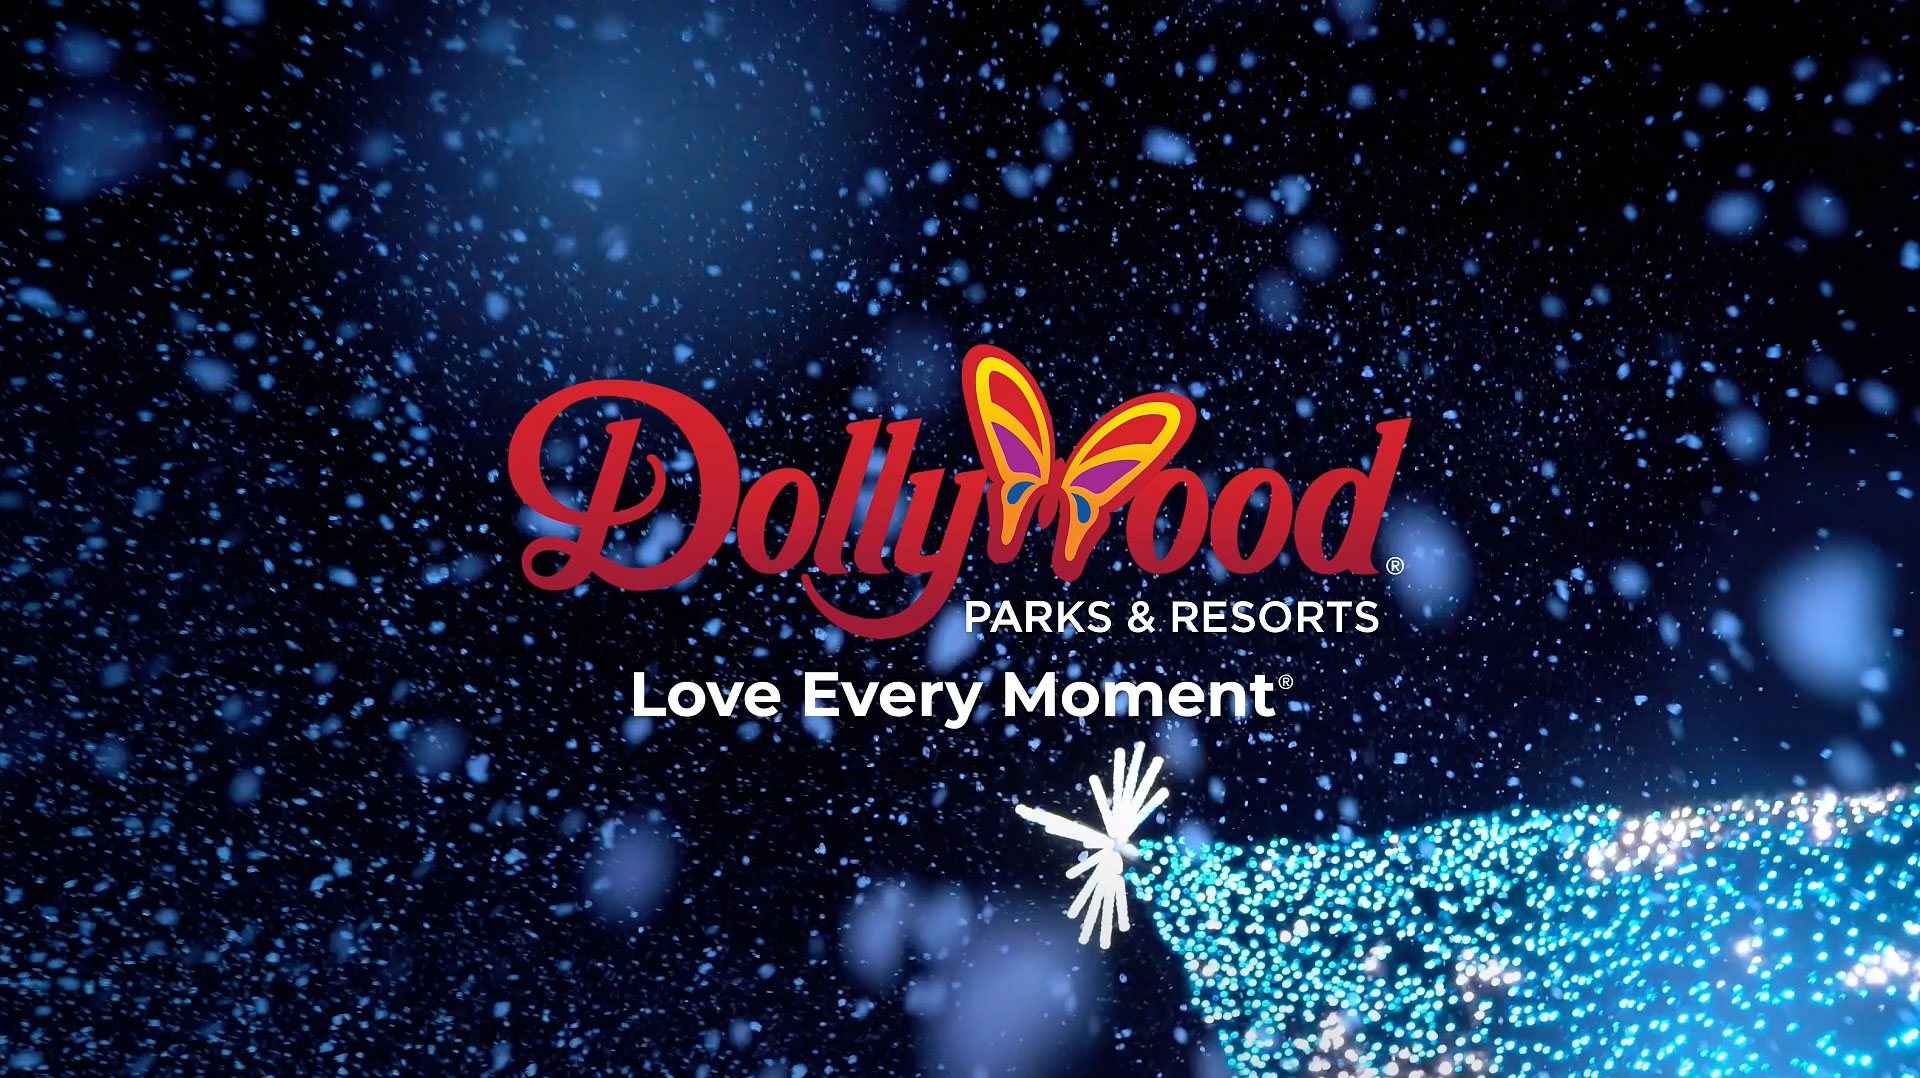 Dollywood logo and tagline over snowy night sky